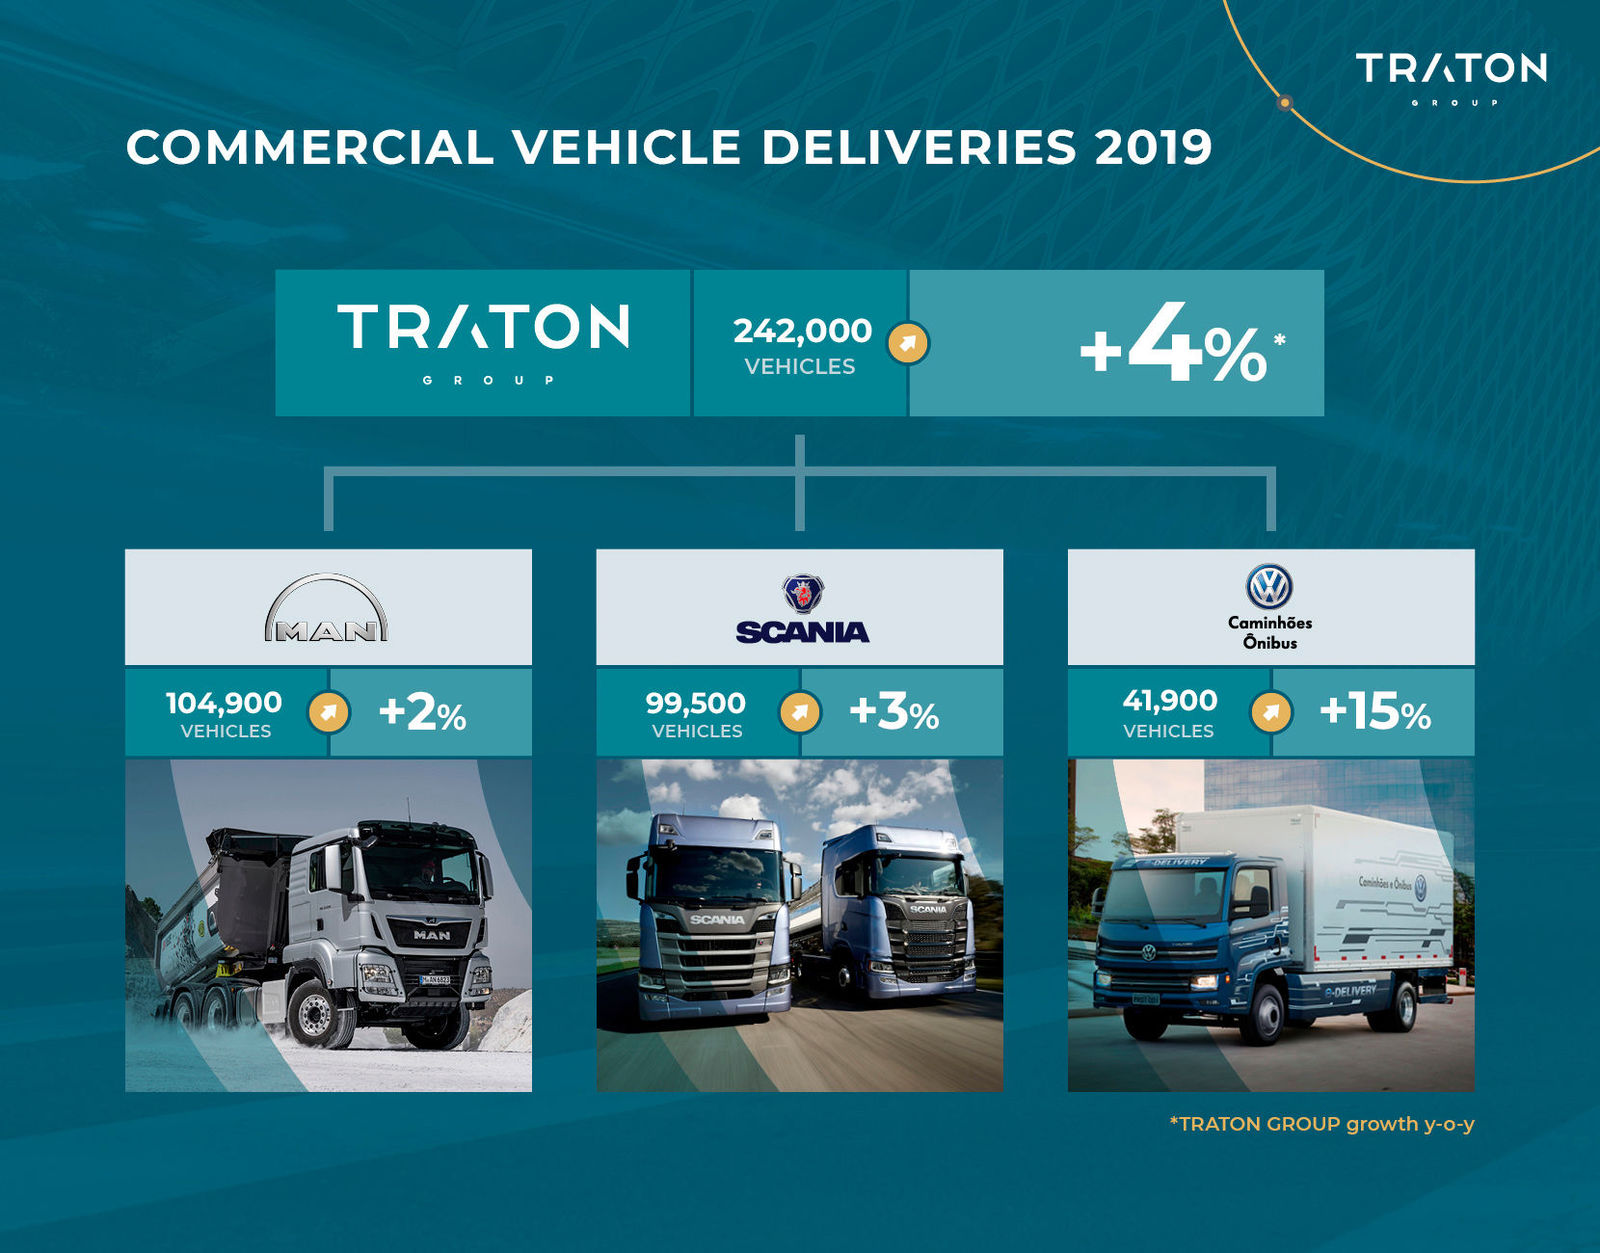 TRATON with strong vehicle sales in 2019